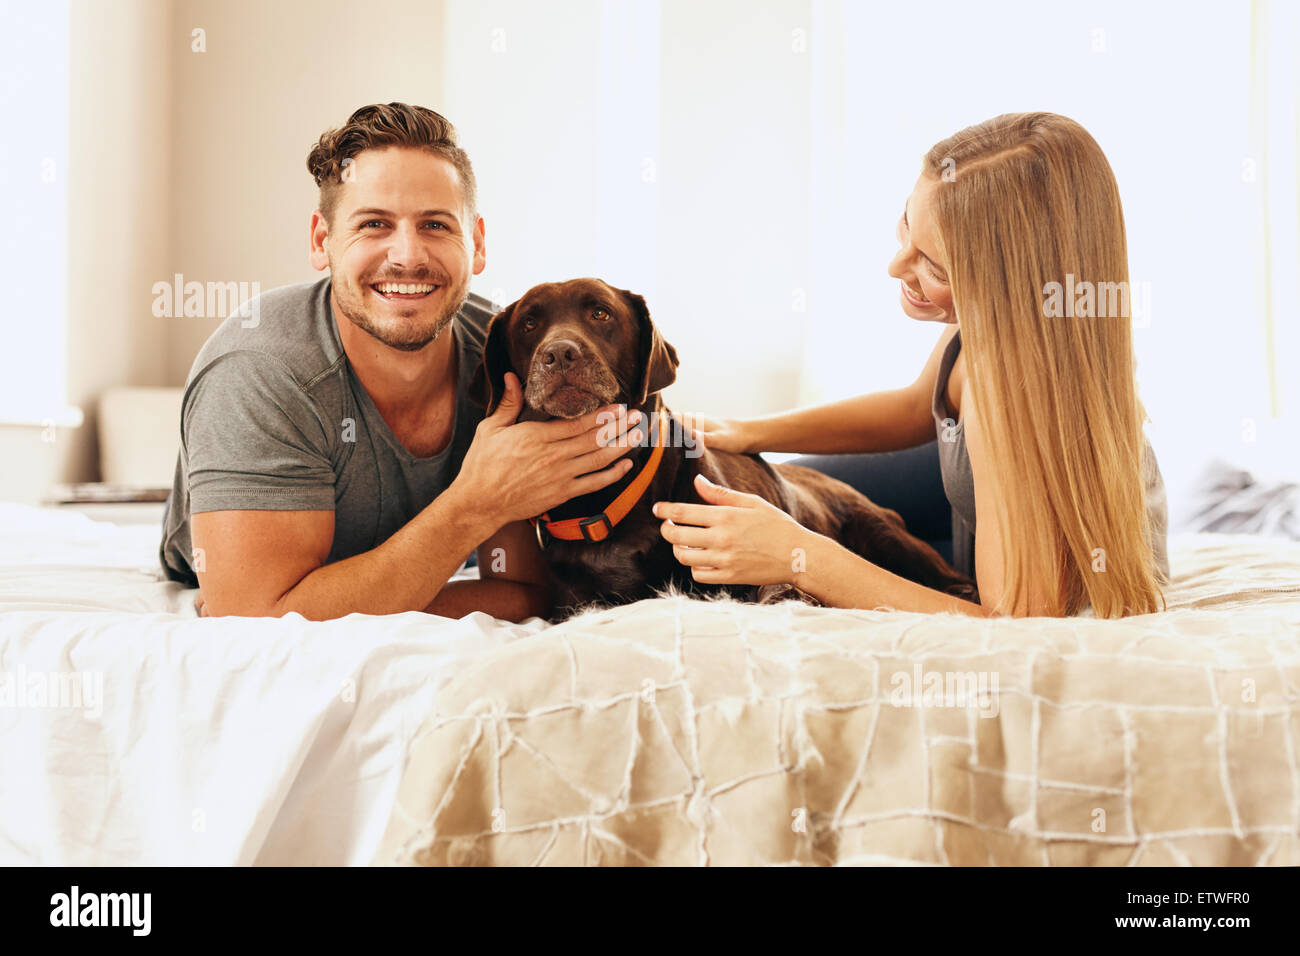 Portrait of happy young couple on bed with dog in matin. L'homme de caresser le chien et souriant. Banque D'Images